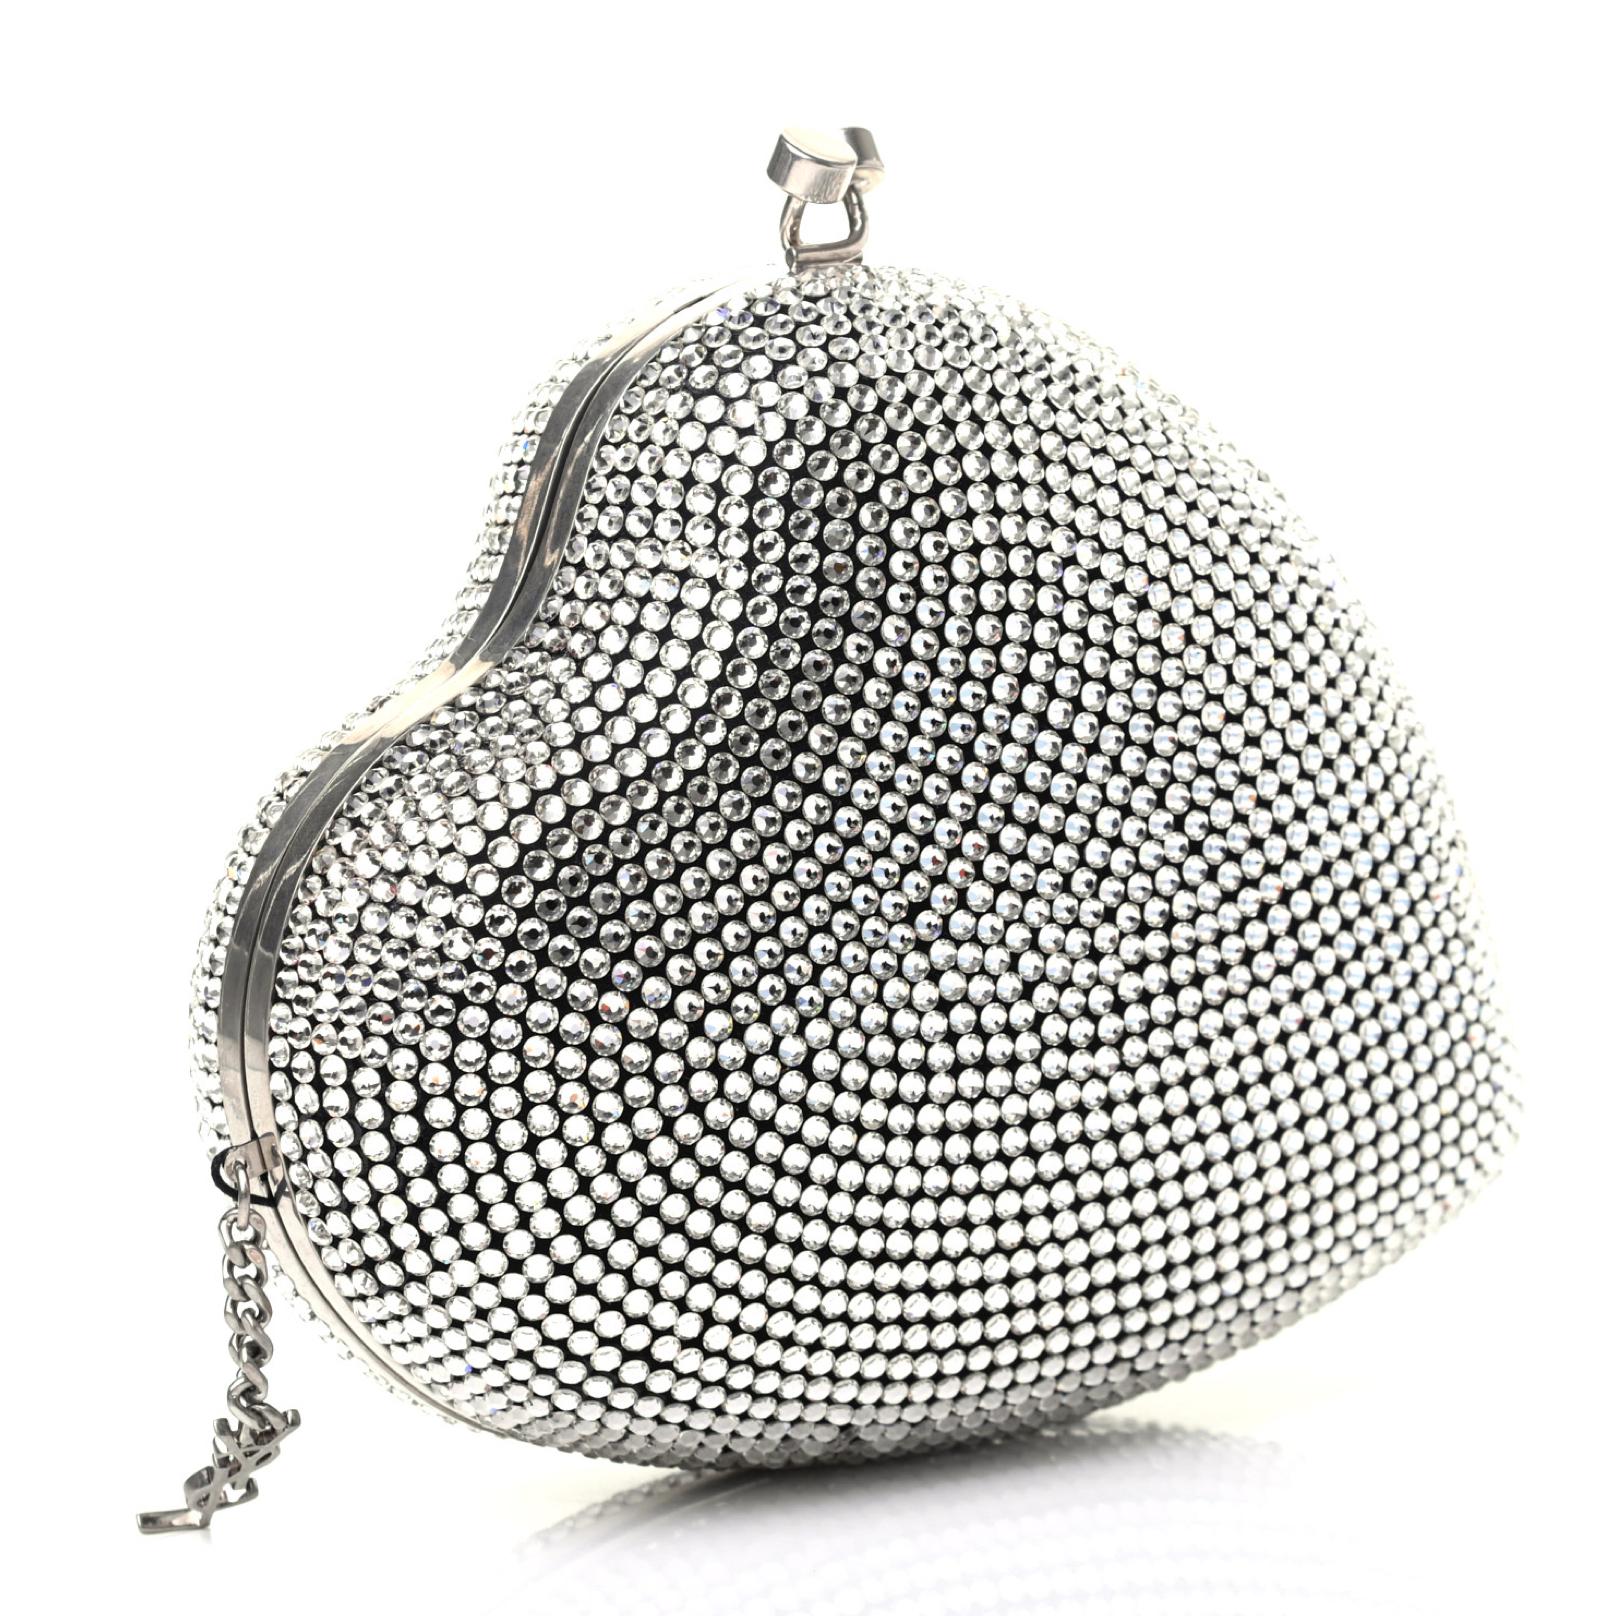 This sculptural heart shape clutch features, an asymmetrical construction, Swarovski crystal detailing, a long silver chain for shoulder carry, kiss-lock fastening and a YSL logo charm at the hinged opening. Limited edition. Can be worn as a clutch